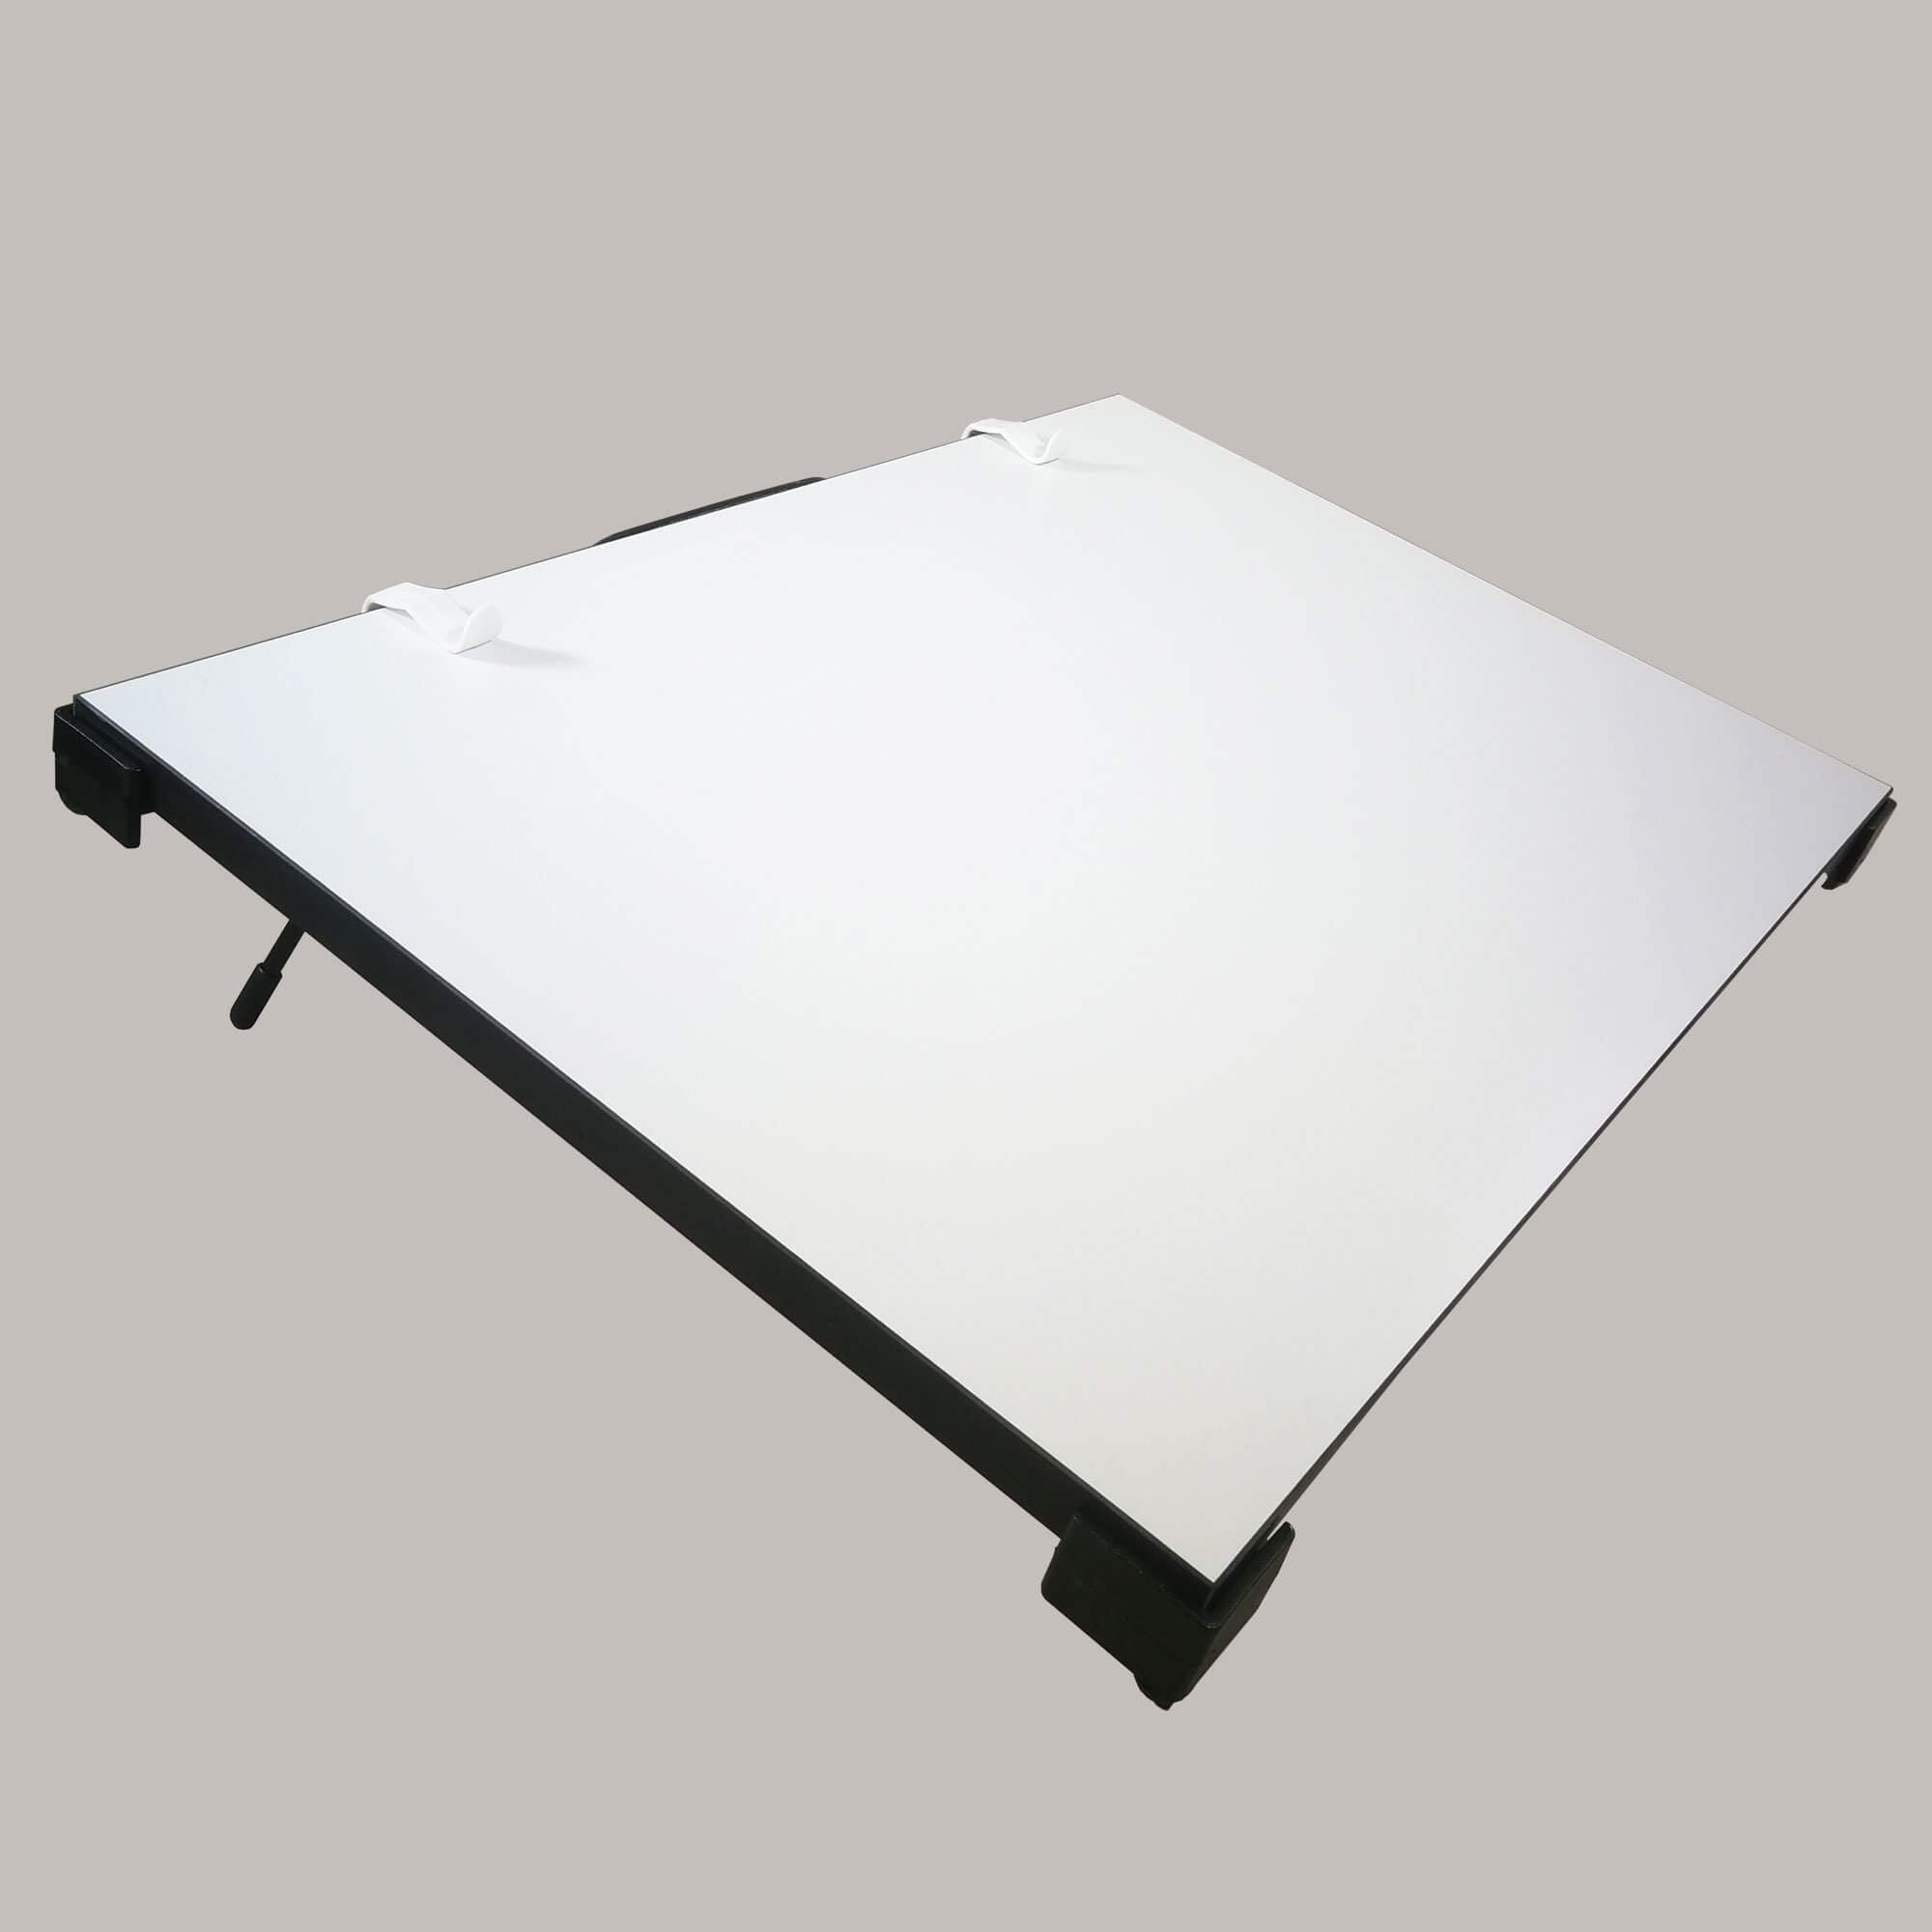 ARTdiscount Artists Drawing Board & Stand